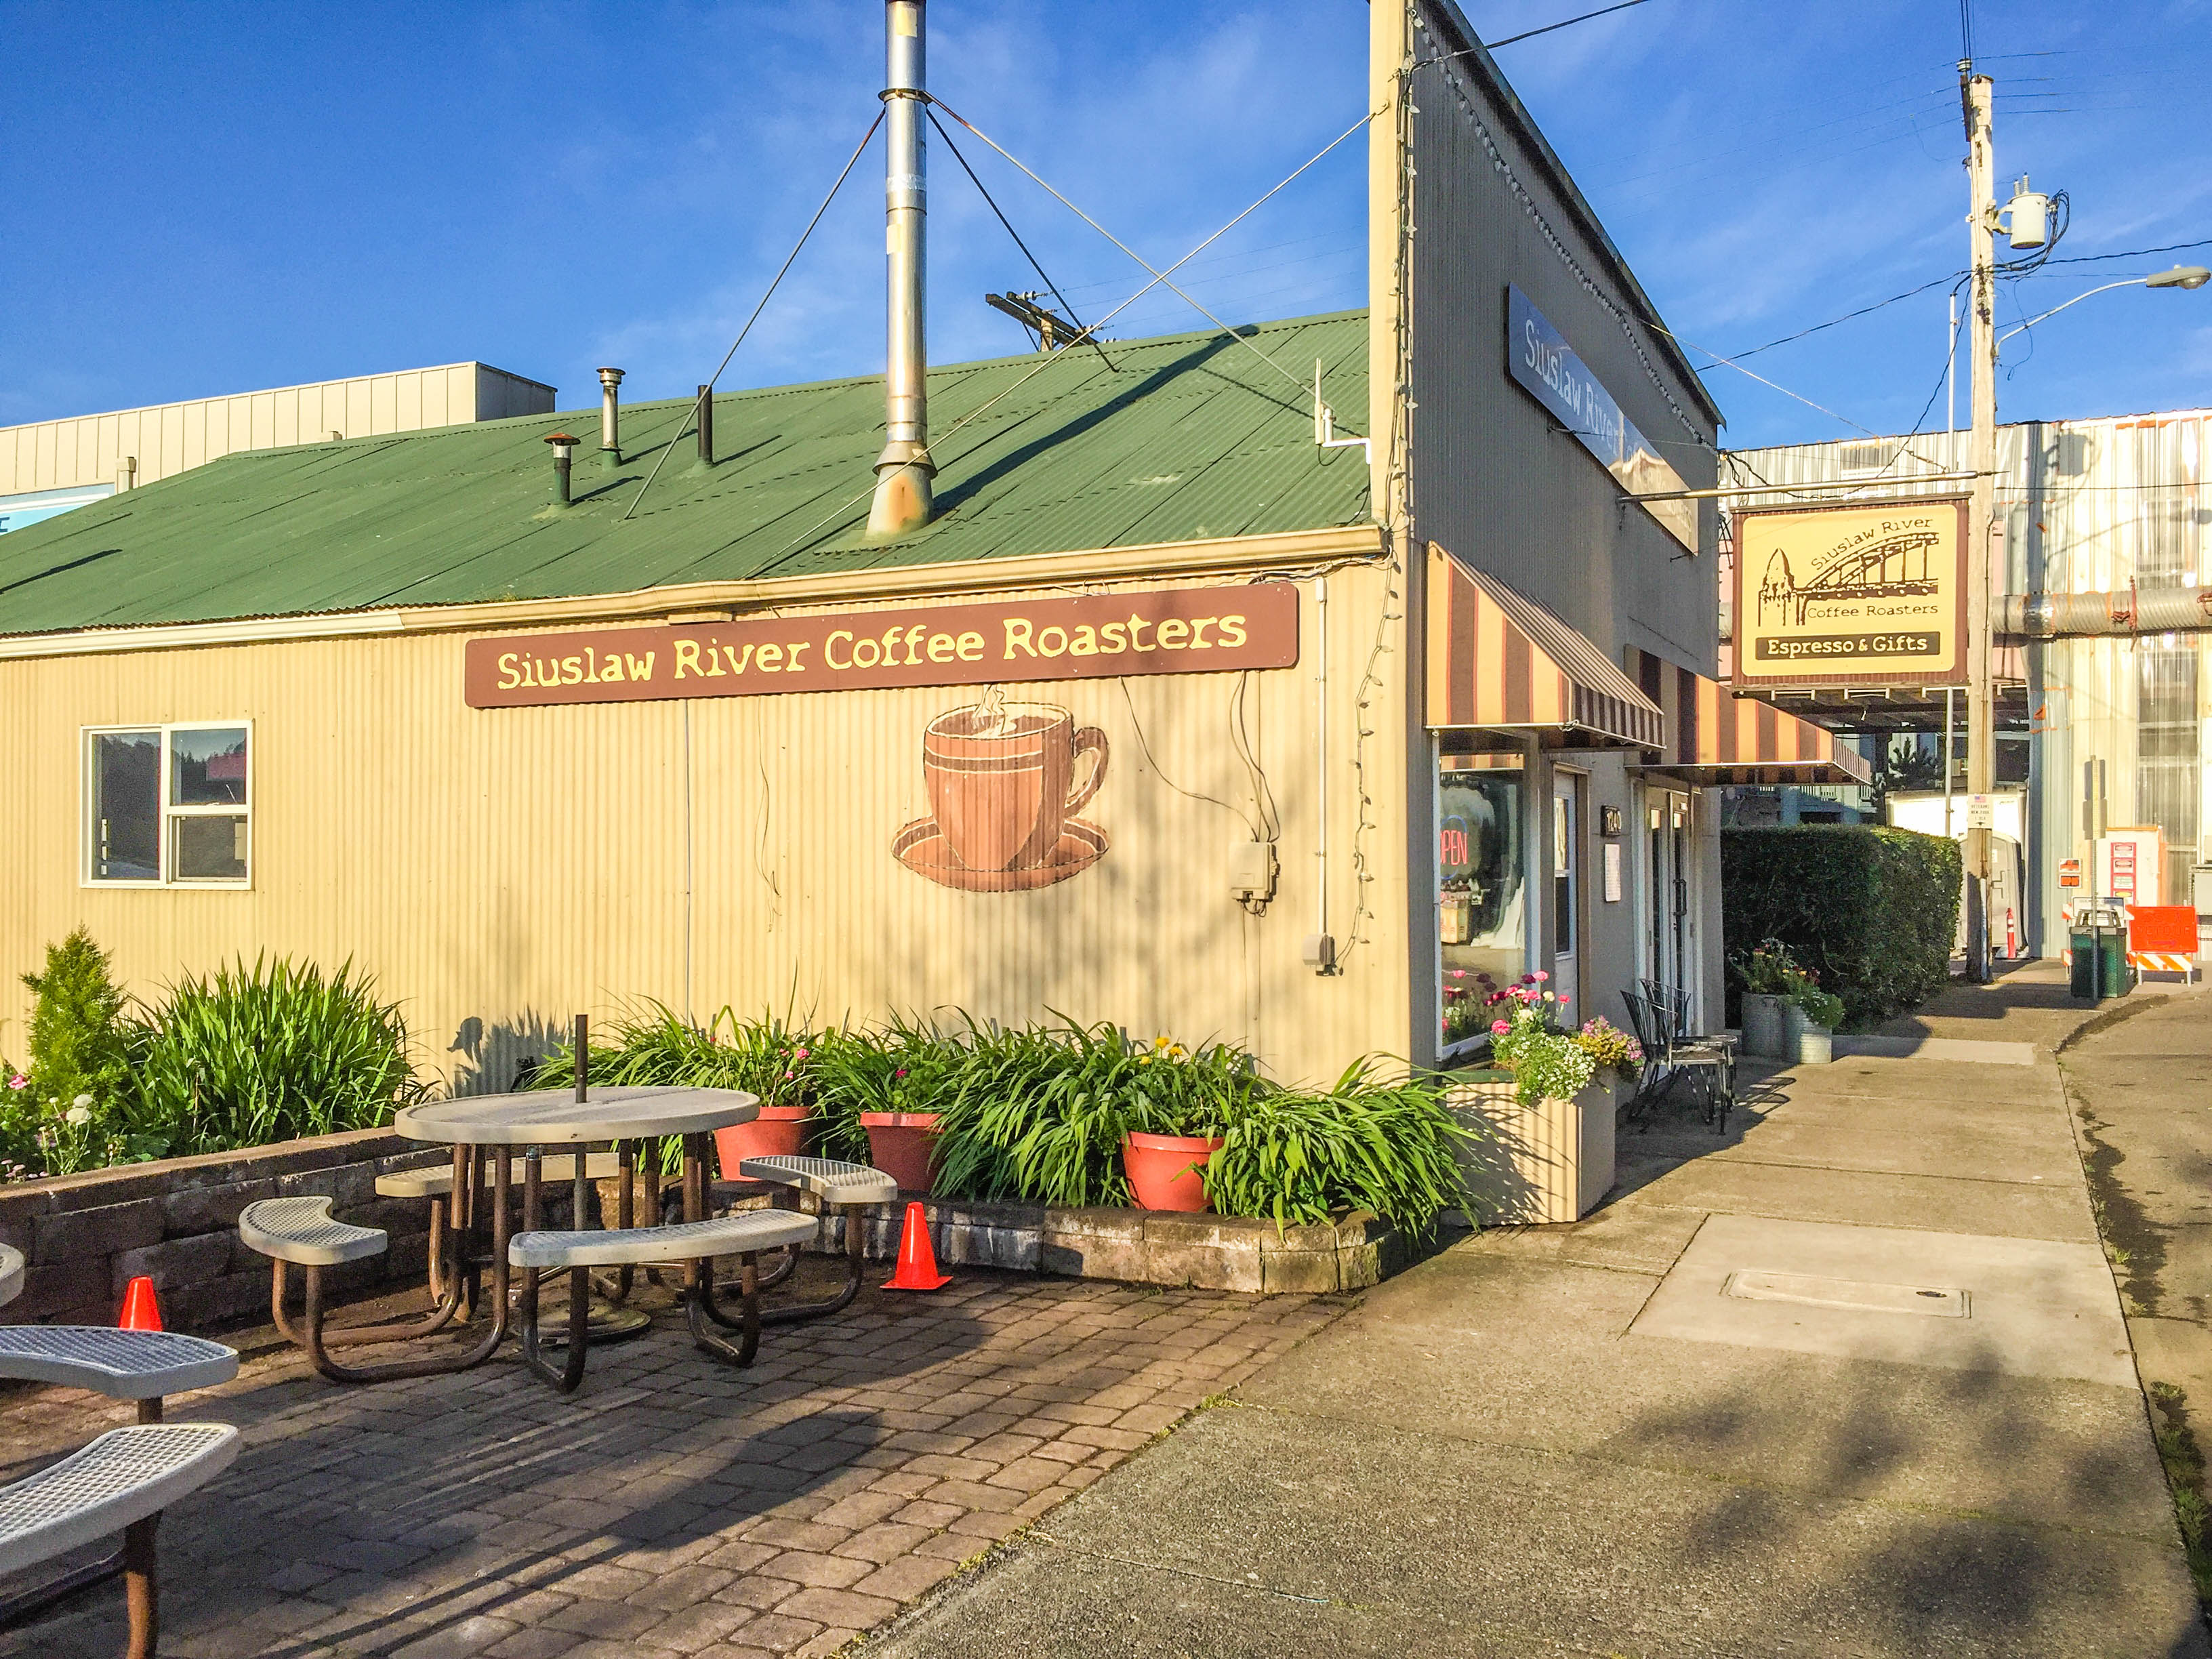 Guide to Florence Oregon: Siuslaw River Coffee Roasters